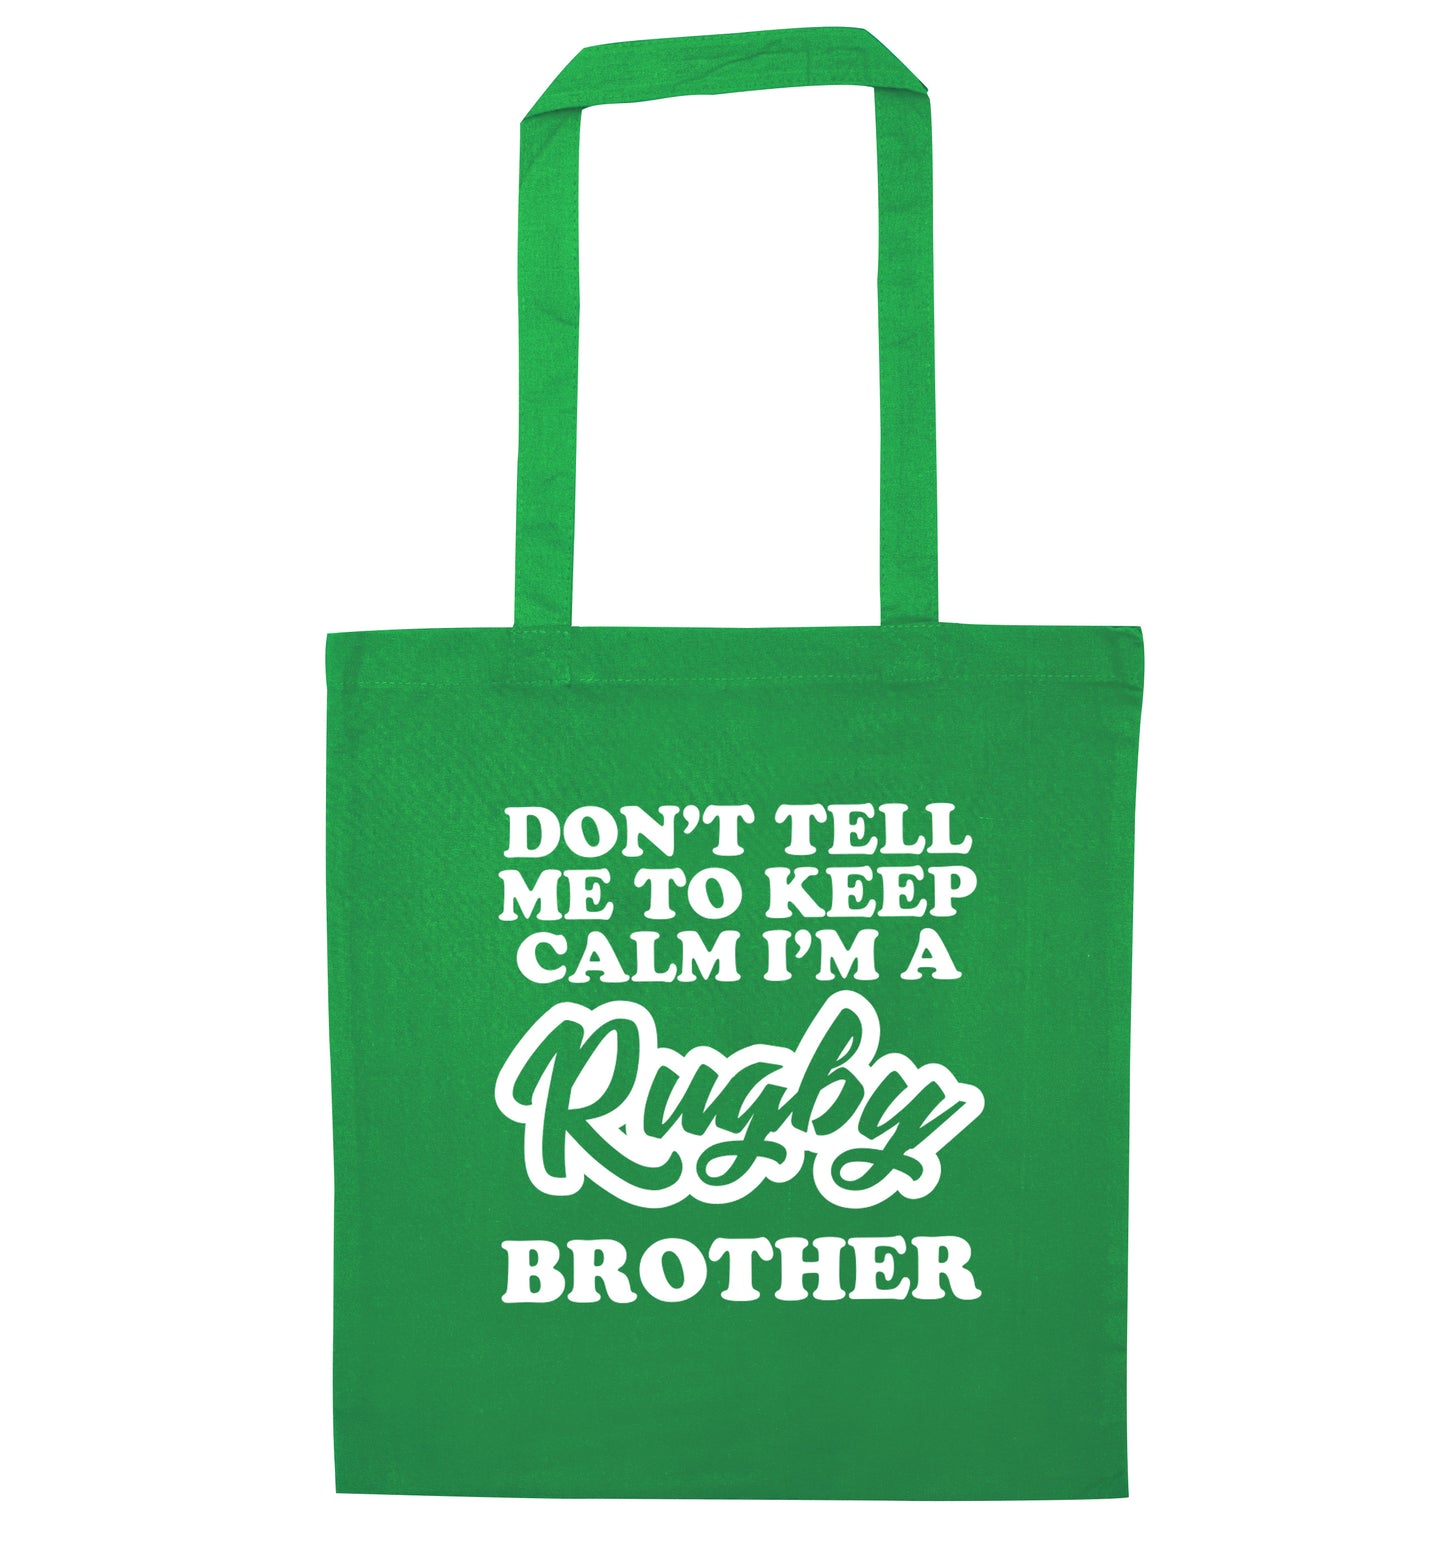 Don't tell me keep calm I'm a rugby brother green tote bag